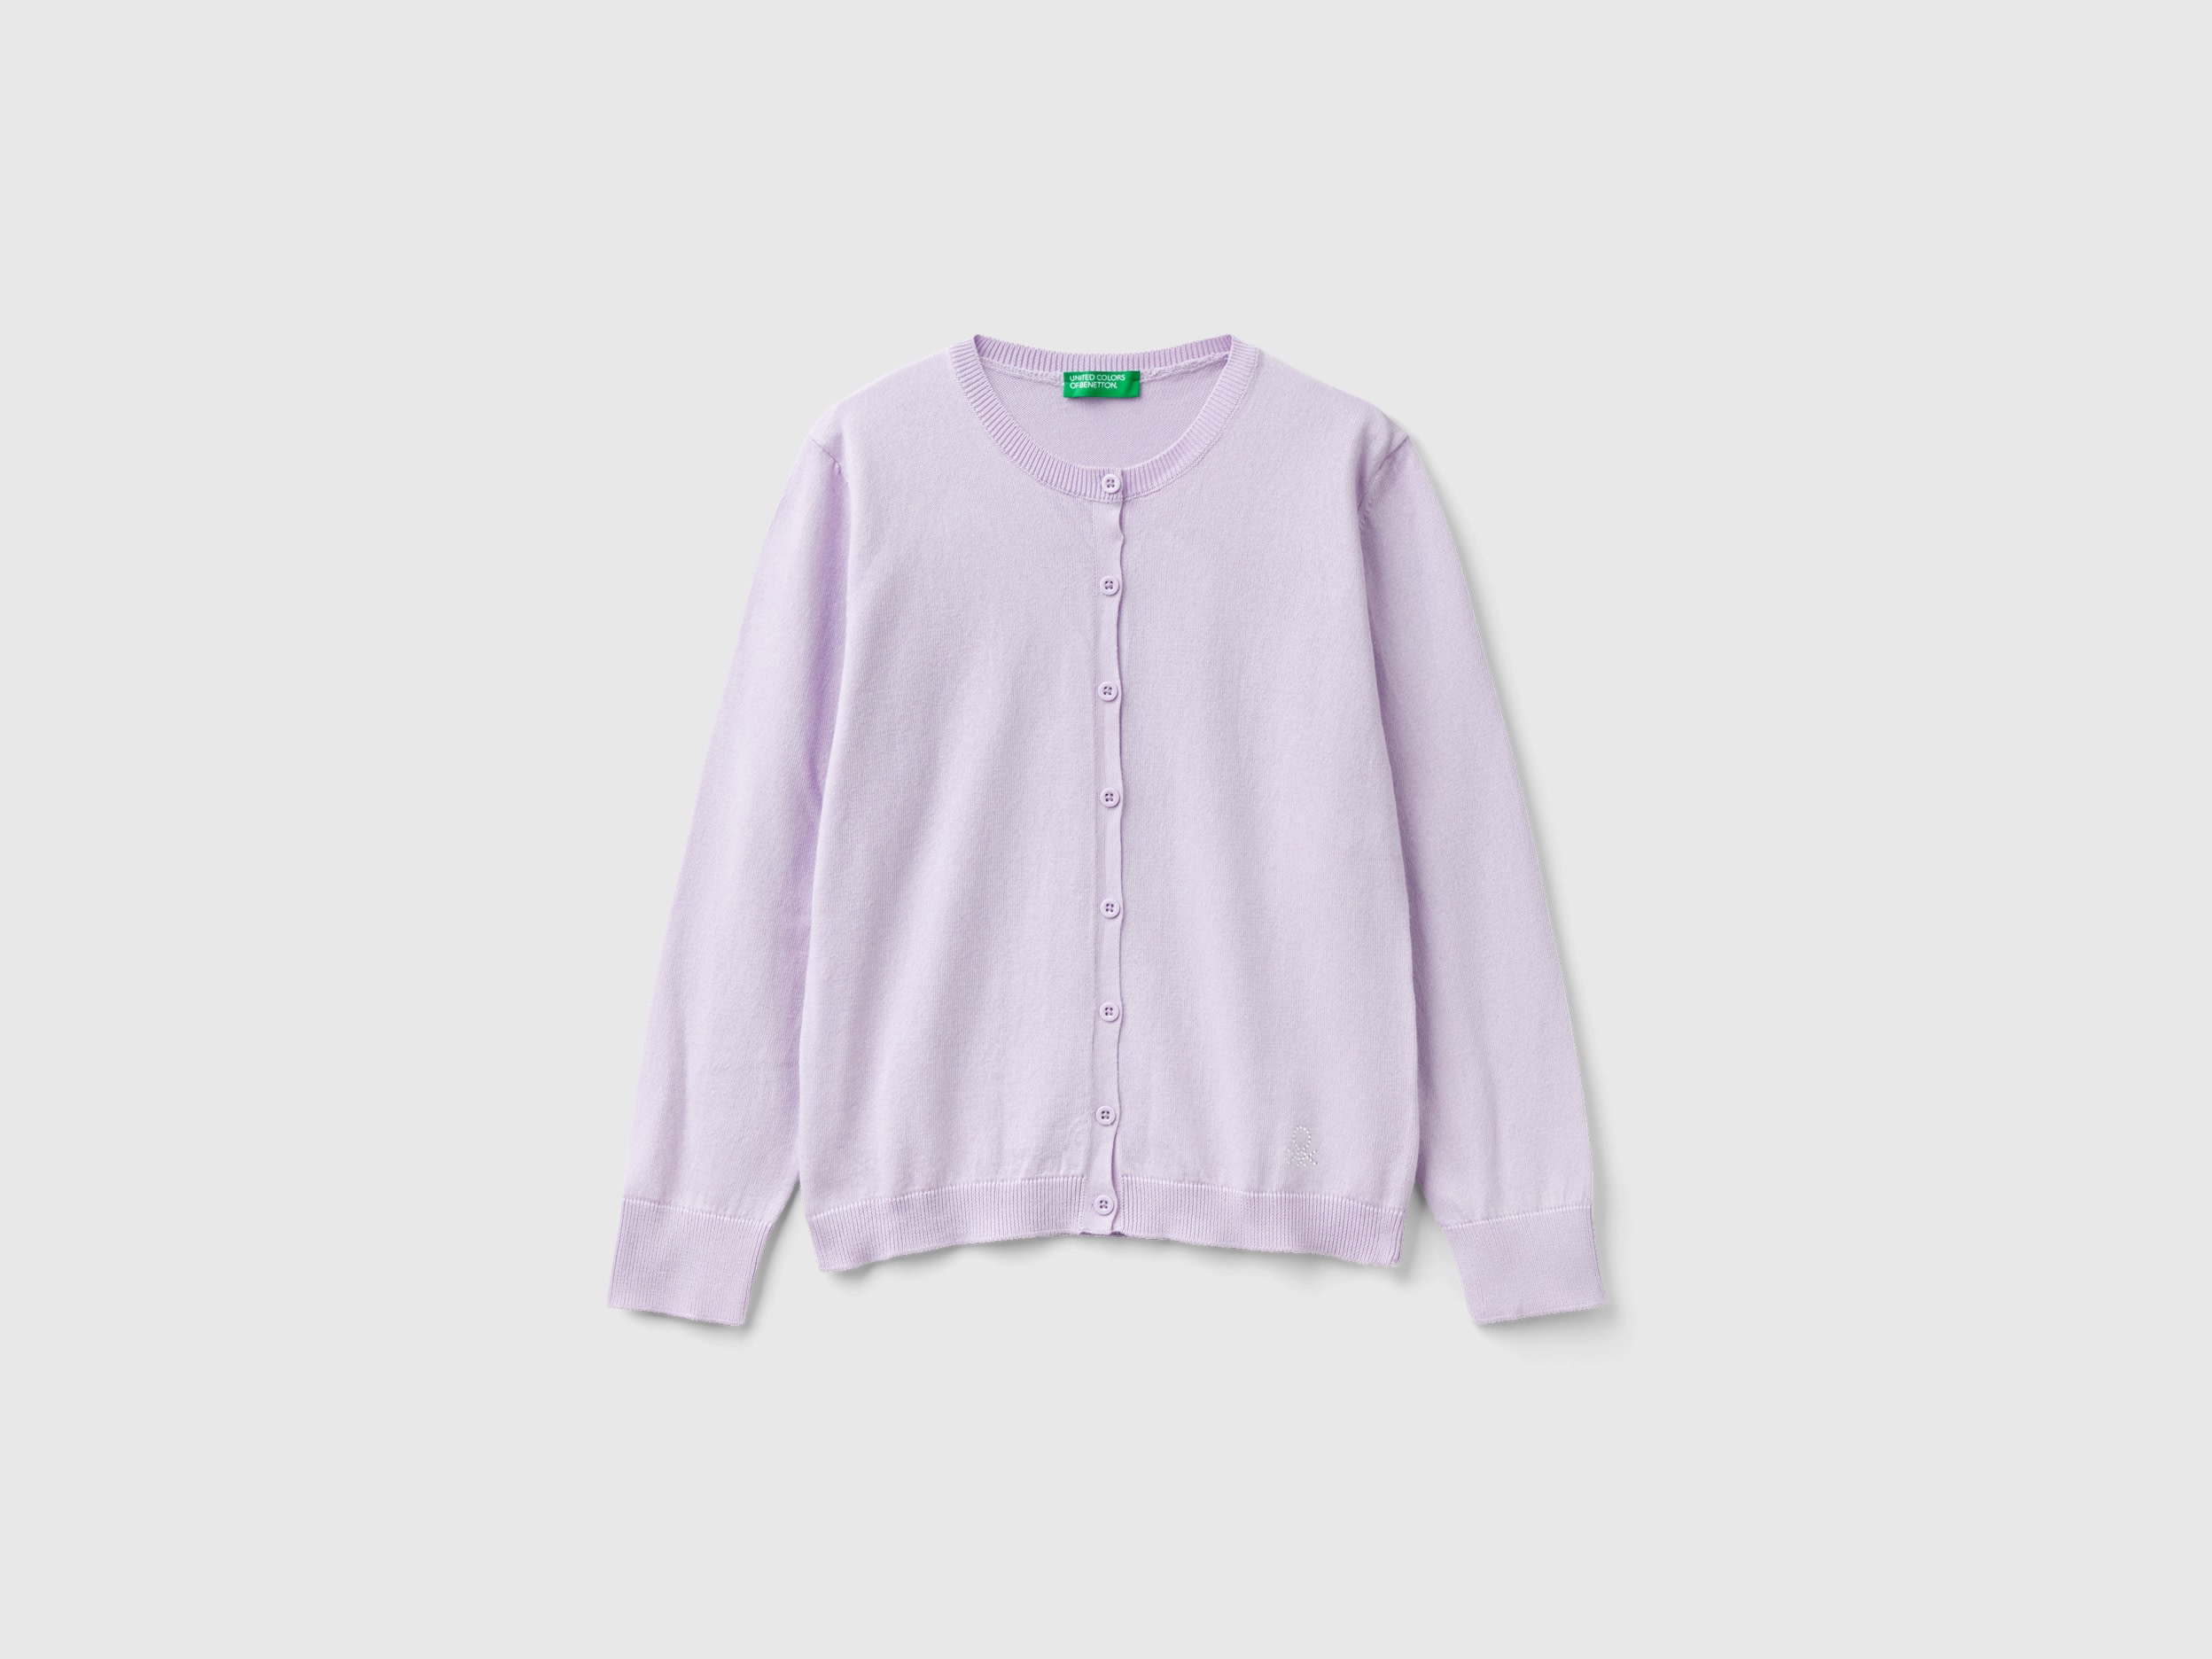 Benetton, Crew Neck Cardigan In Cotton Blend, size M, Lilac, Kids